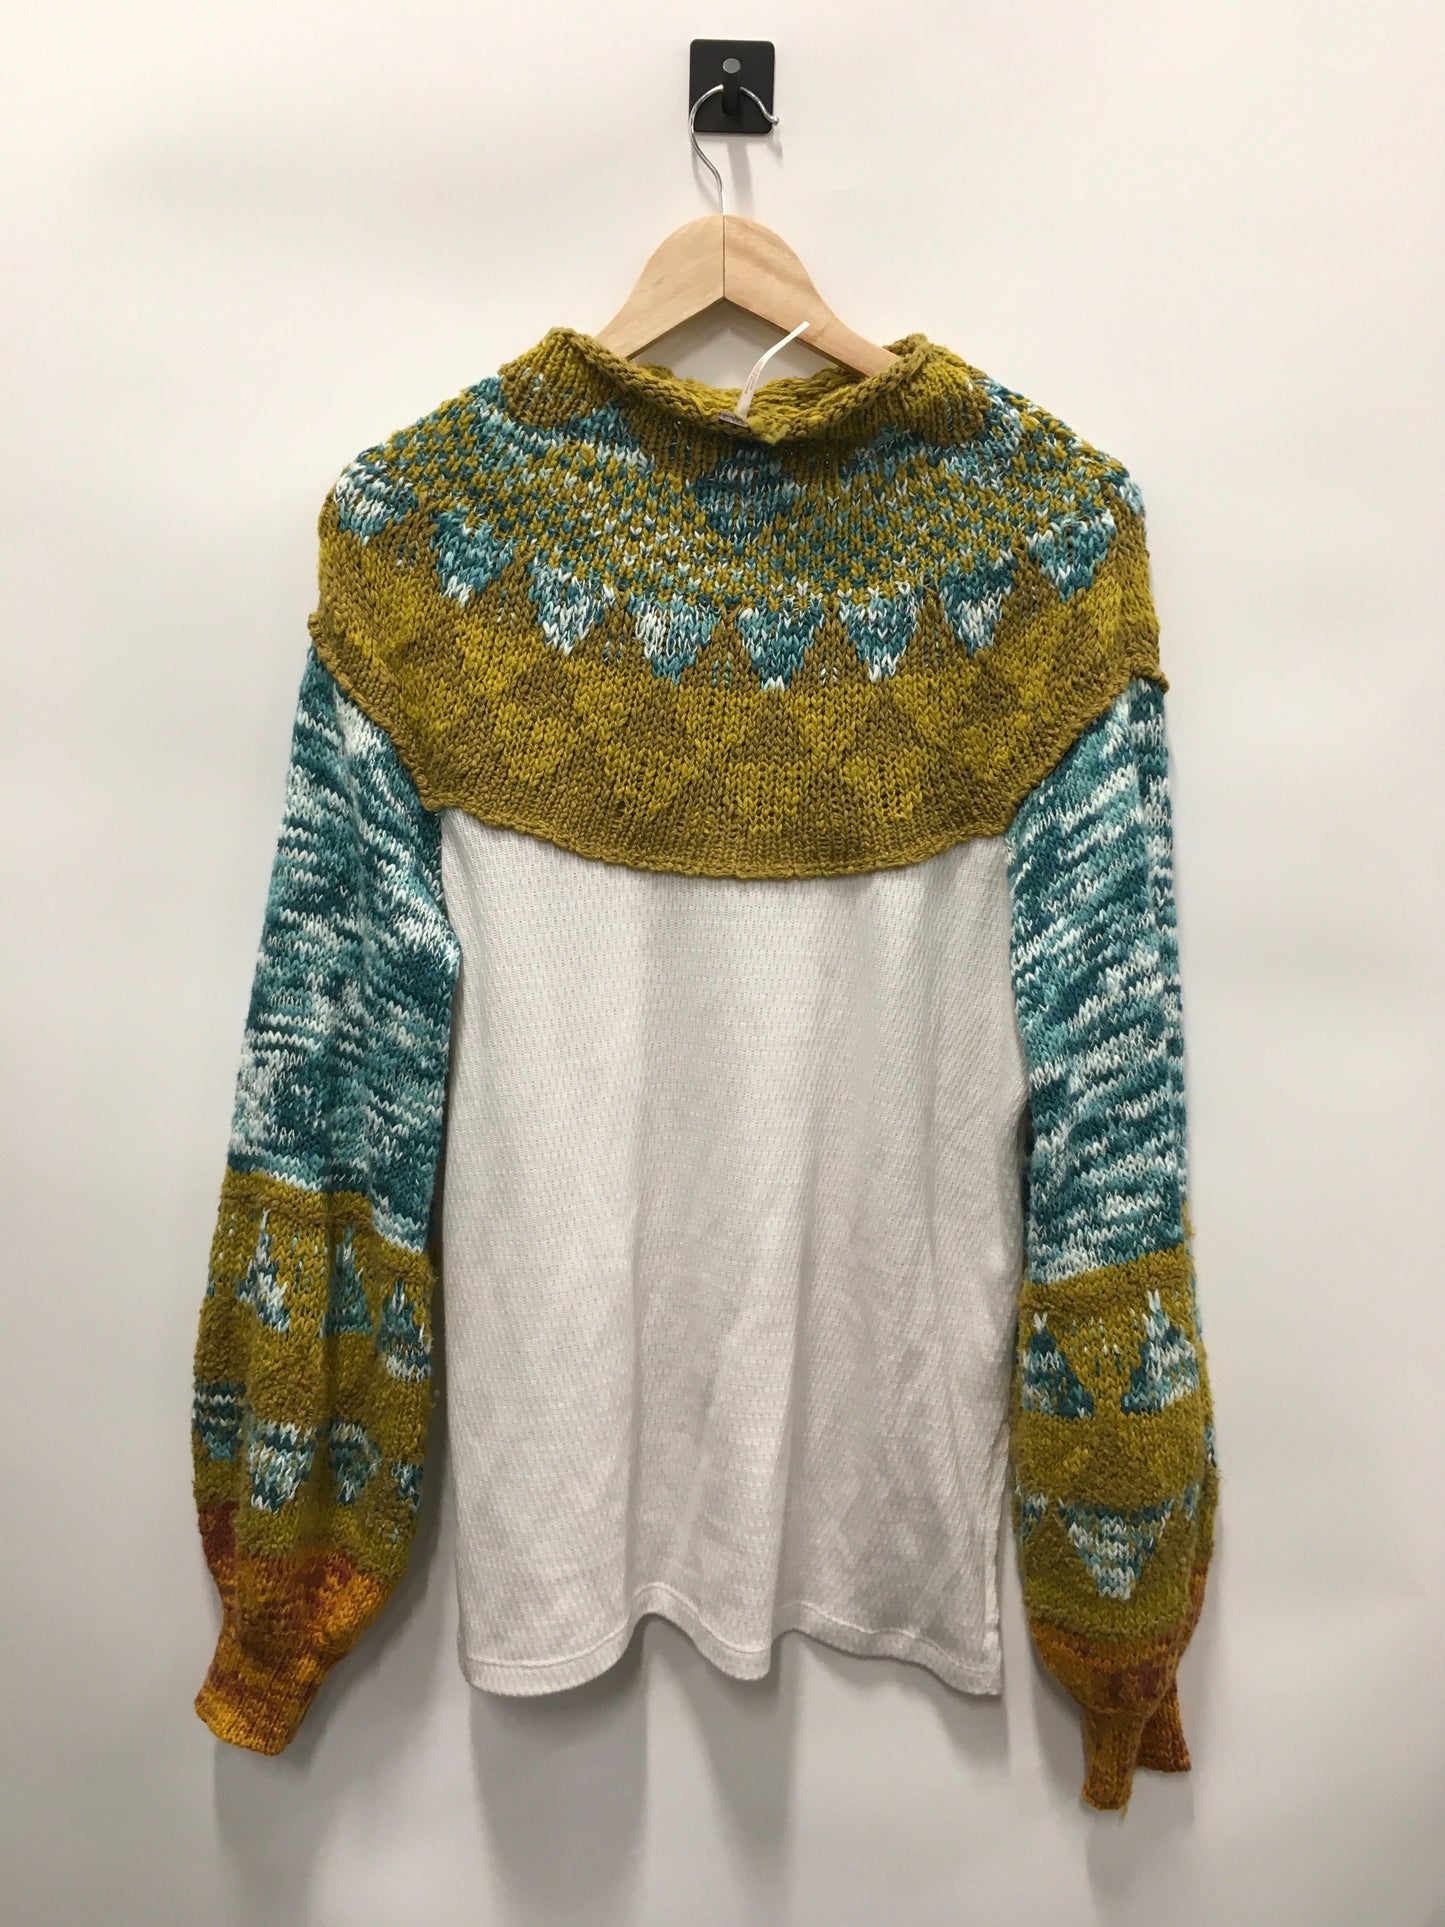 Green & White Sweater Free People, Size L